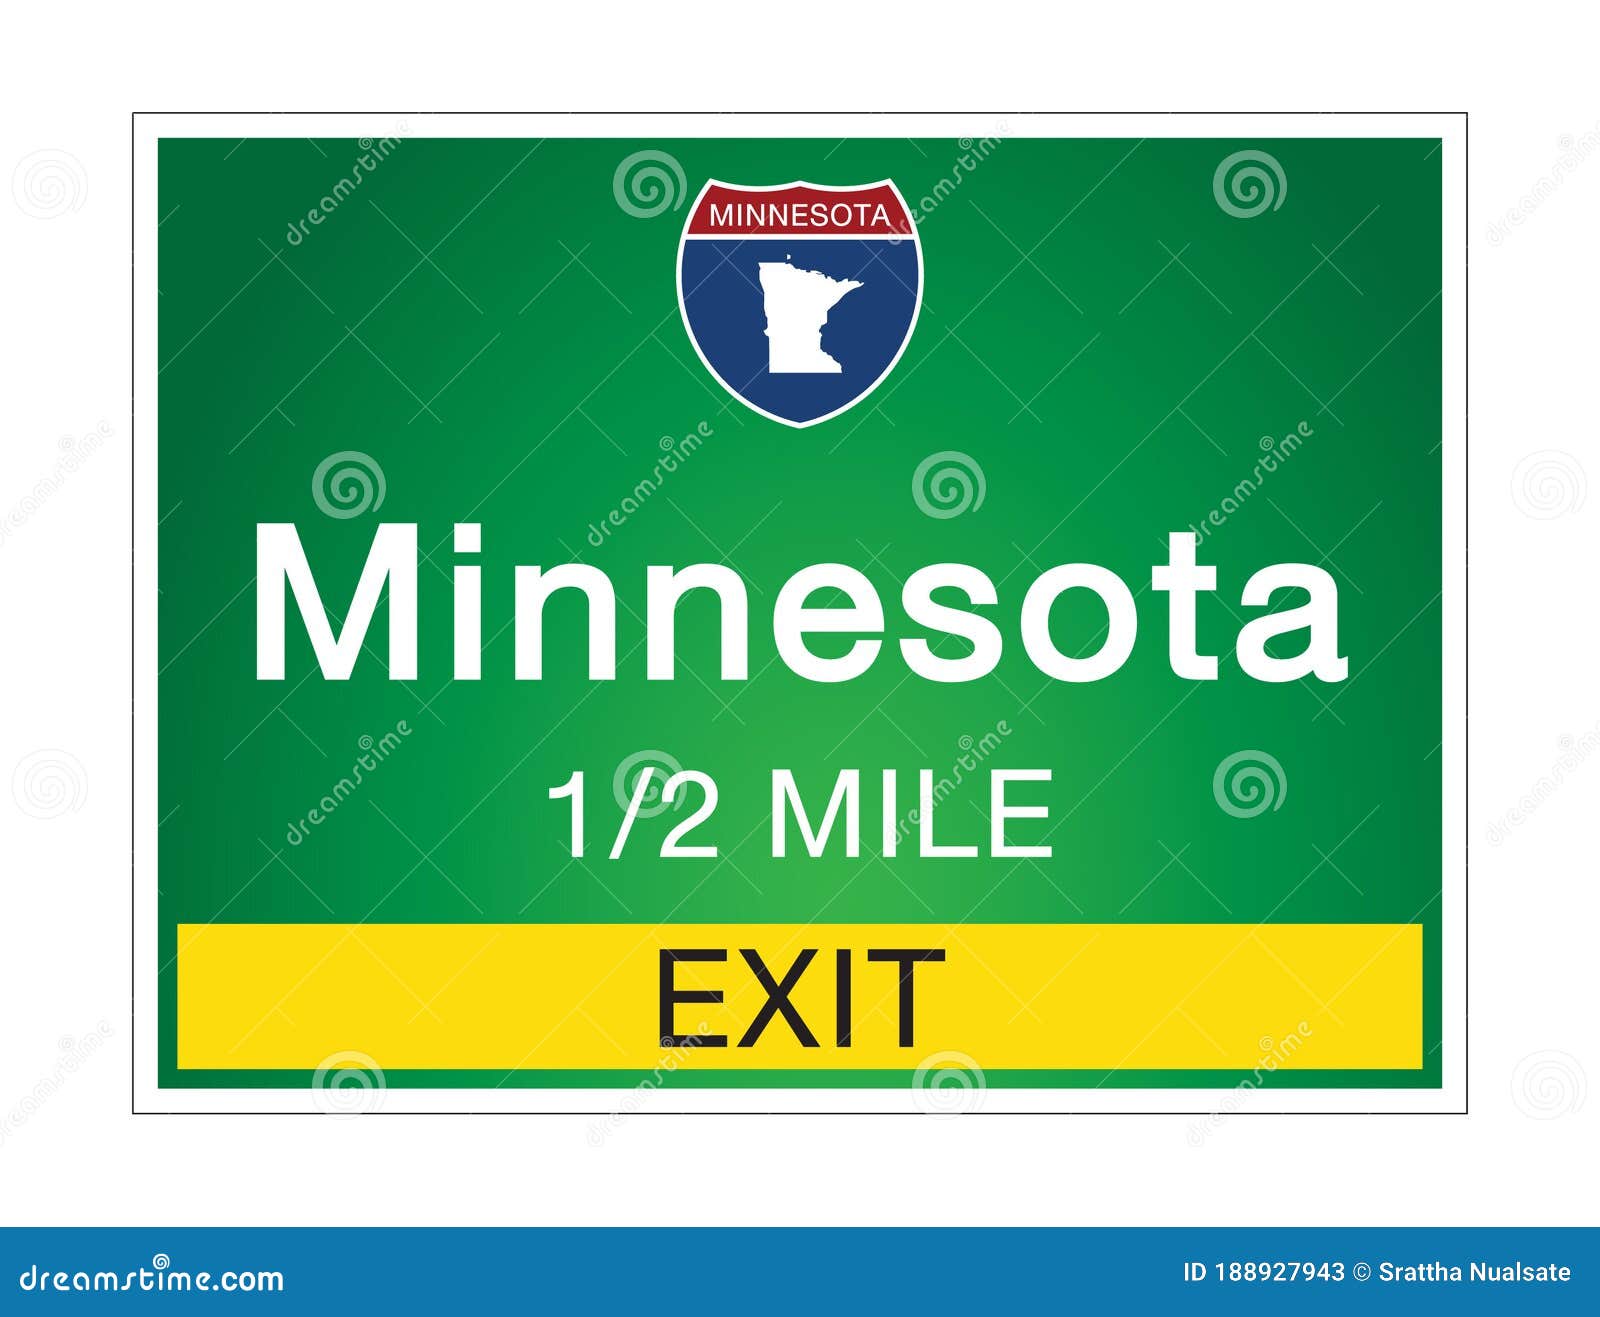 Minnesota State Highway 371 Sticker Decal R5049 Highway Route sign 